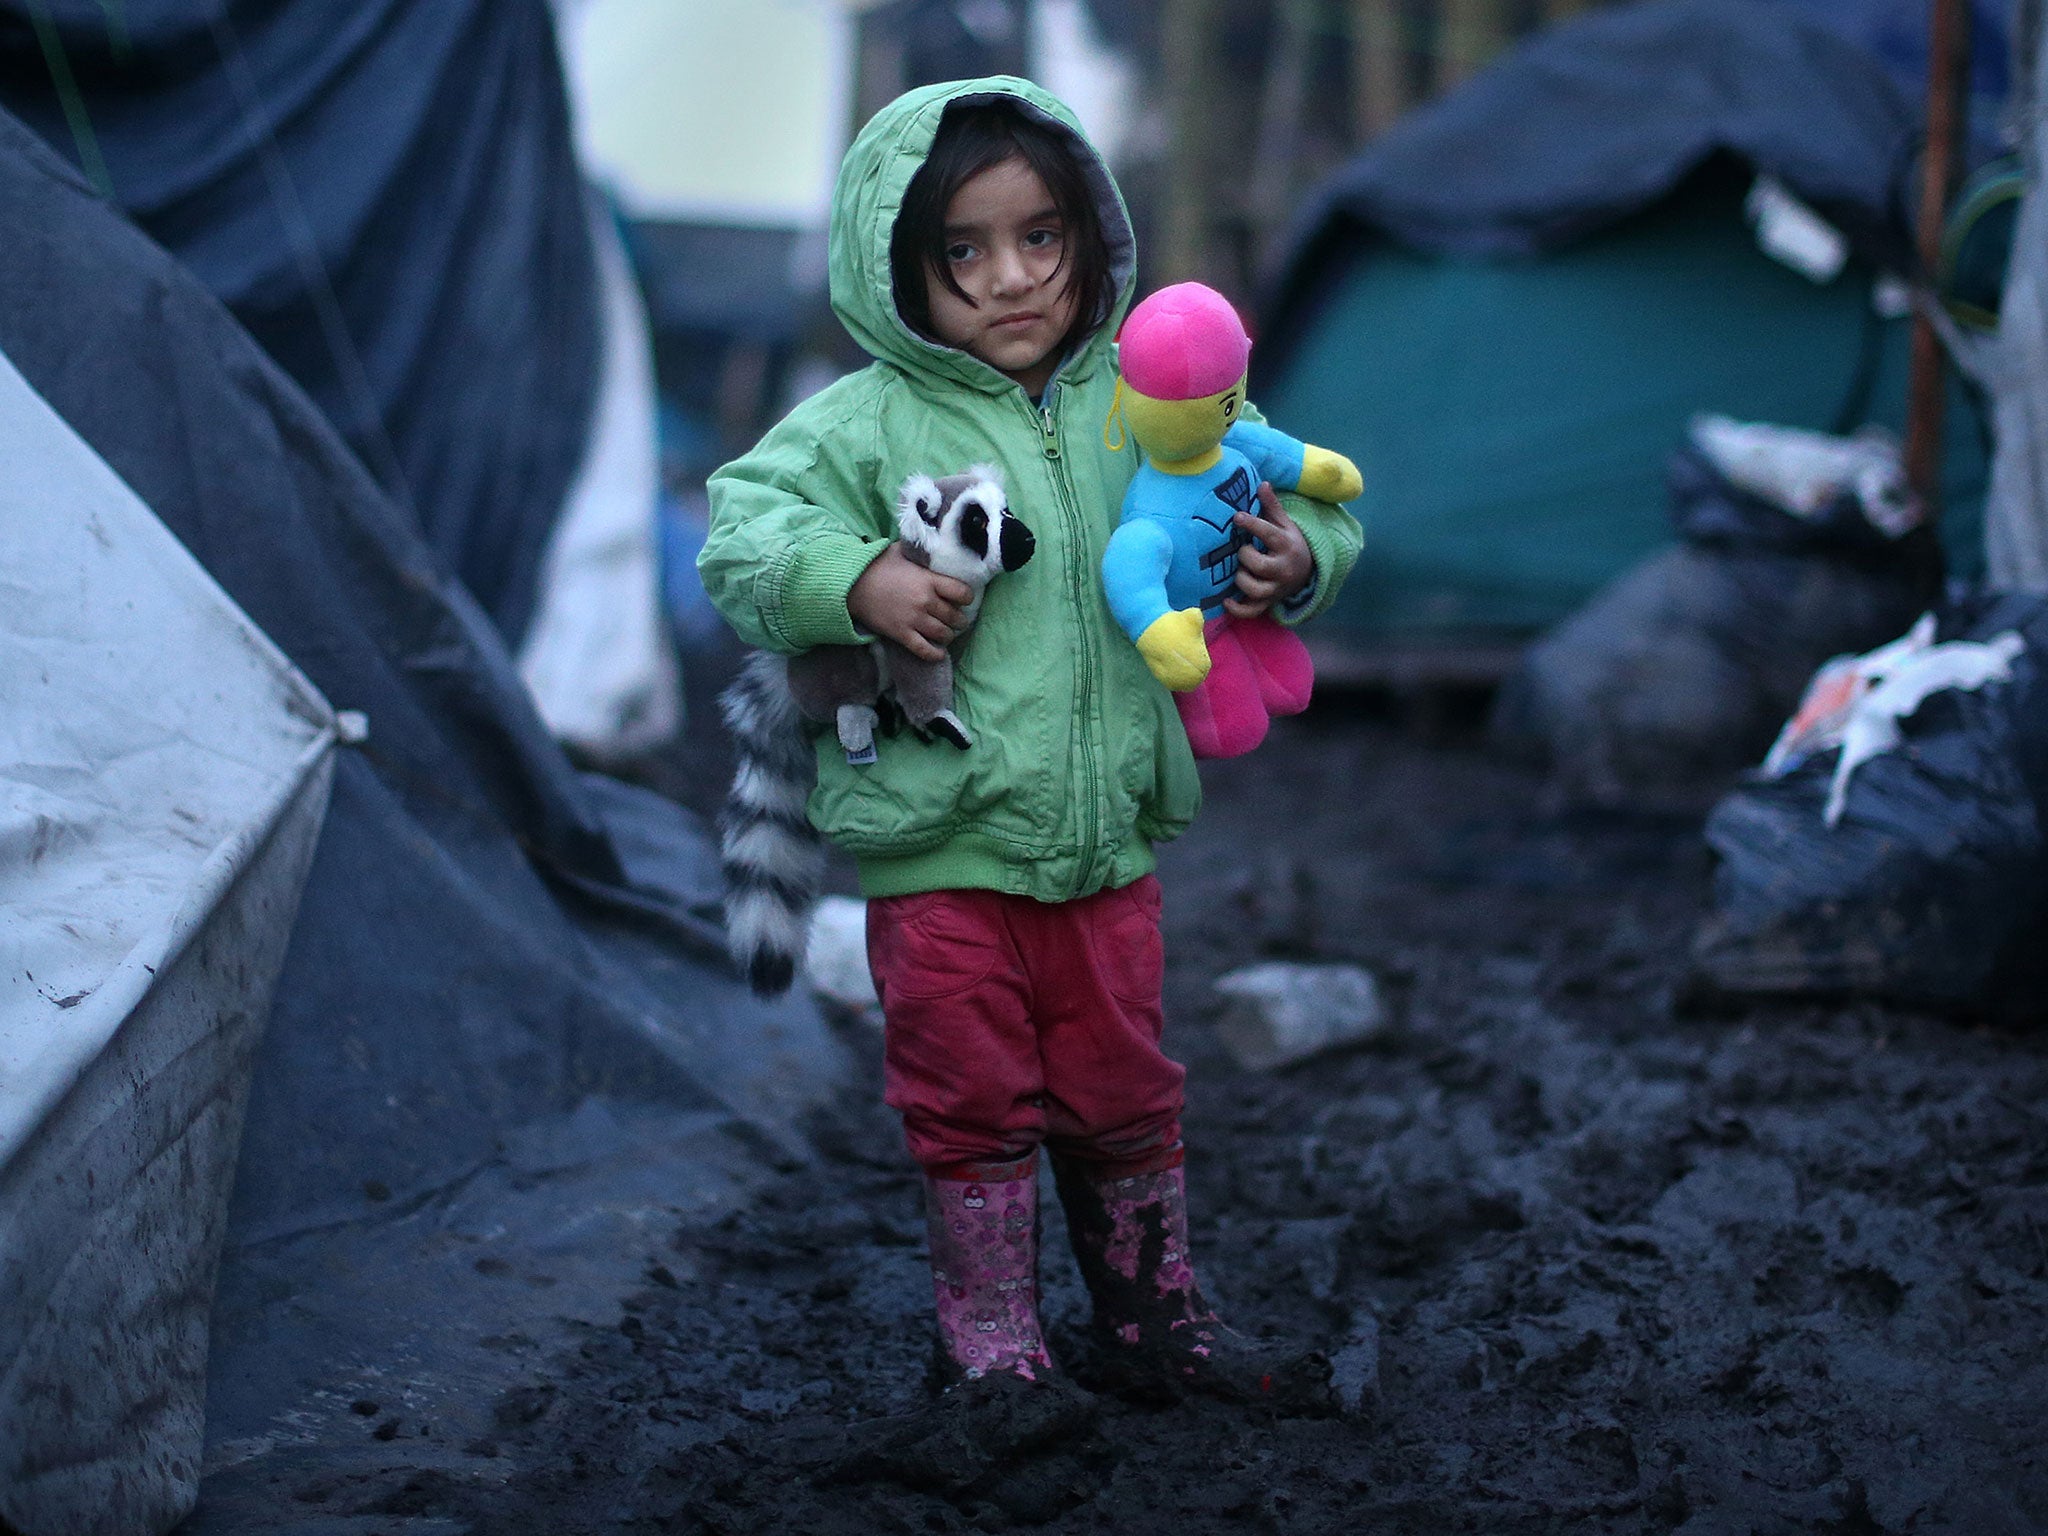 A young Kurdish girl holds her toys as she stands in the mud in a migrant camp in Dunkirk, France